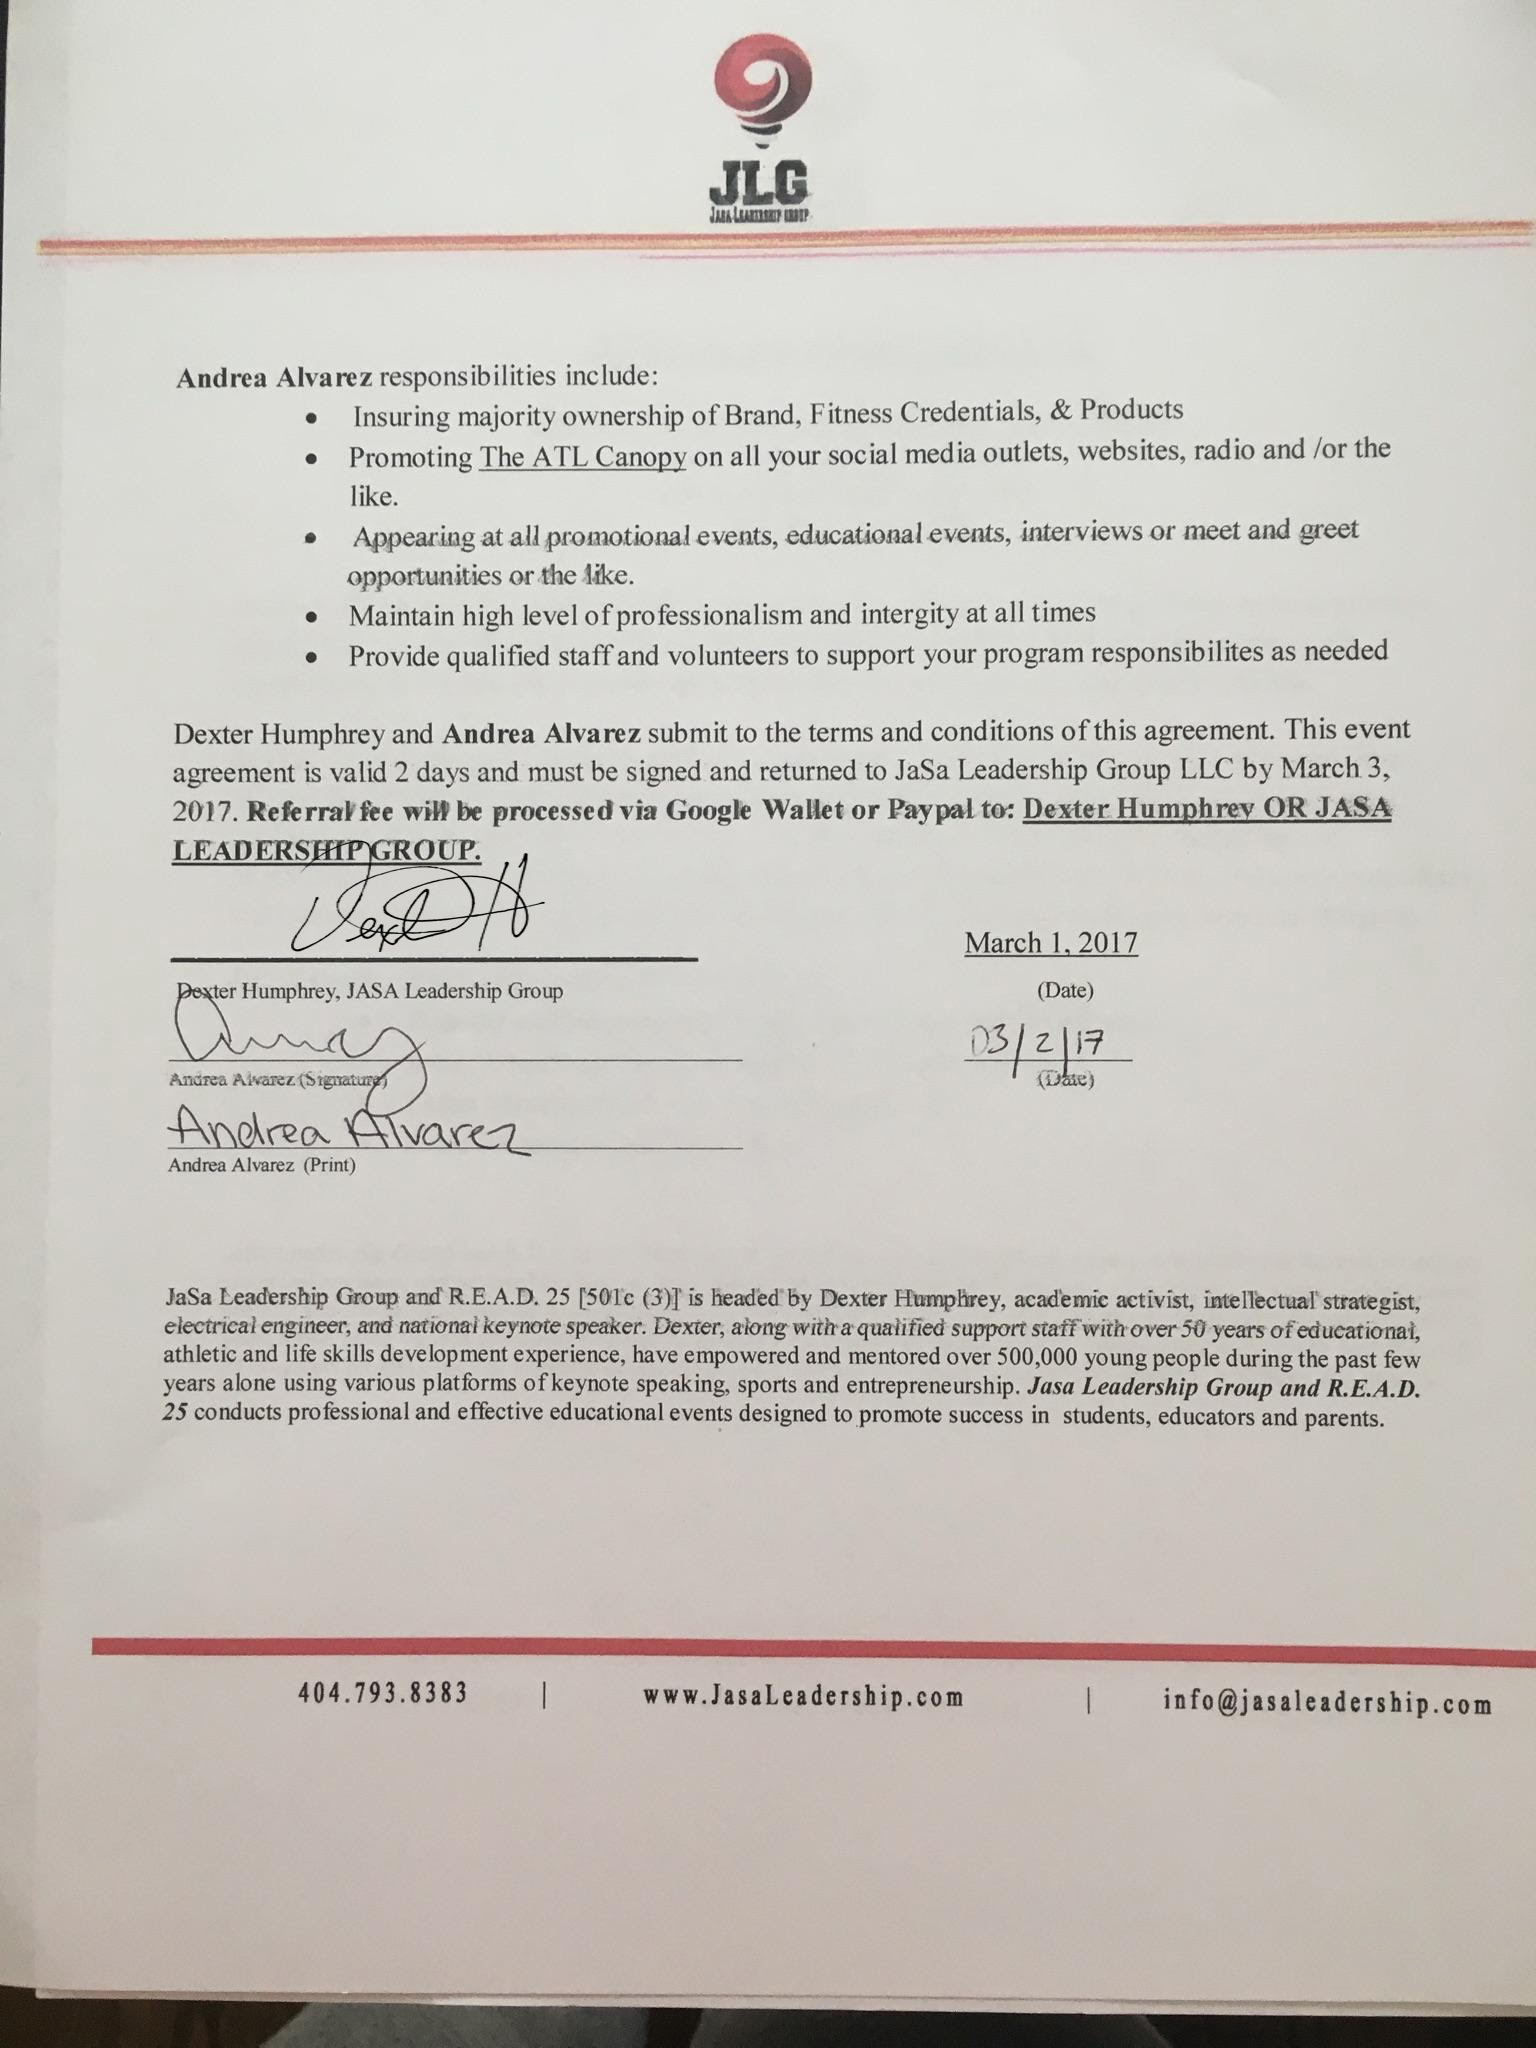 Executed agreement between Andrea Alvarez and Jasa Leadership Group pg. 2